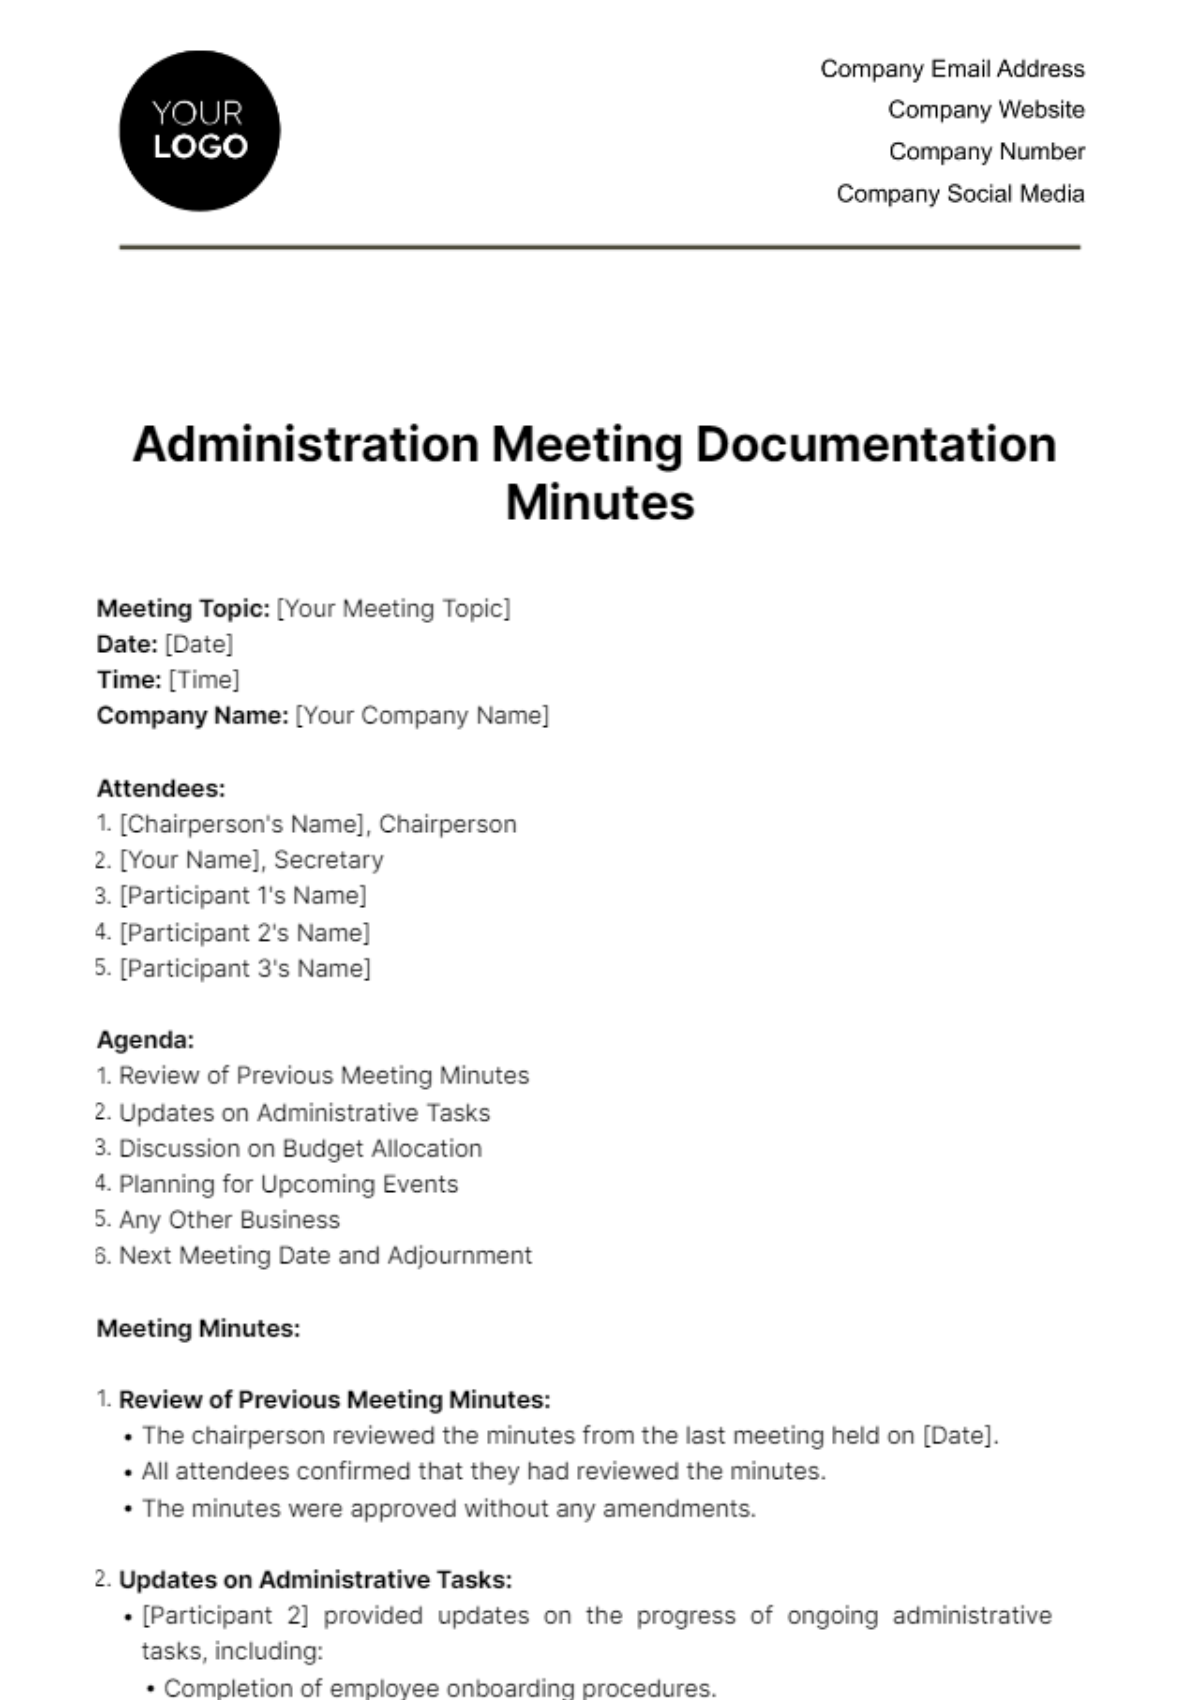 Free Administration Meeting Documentation Minute Template